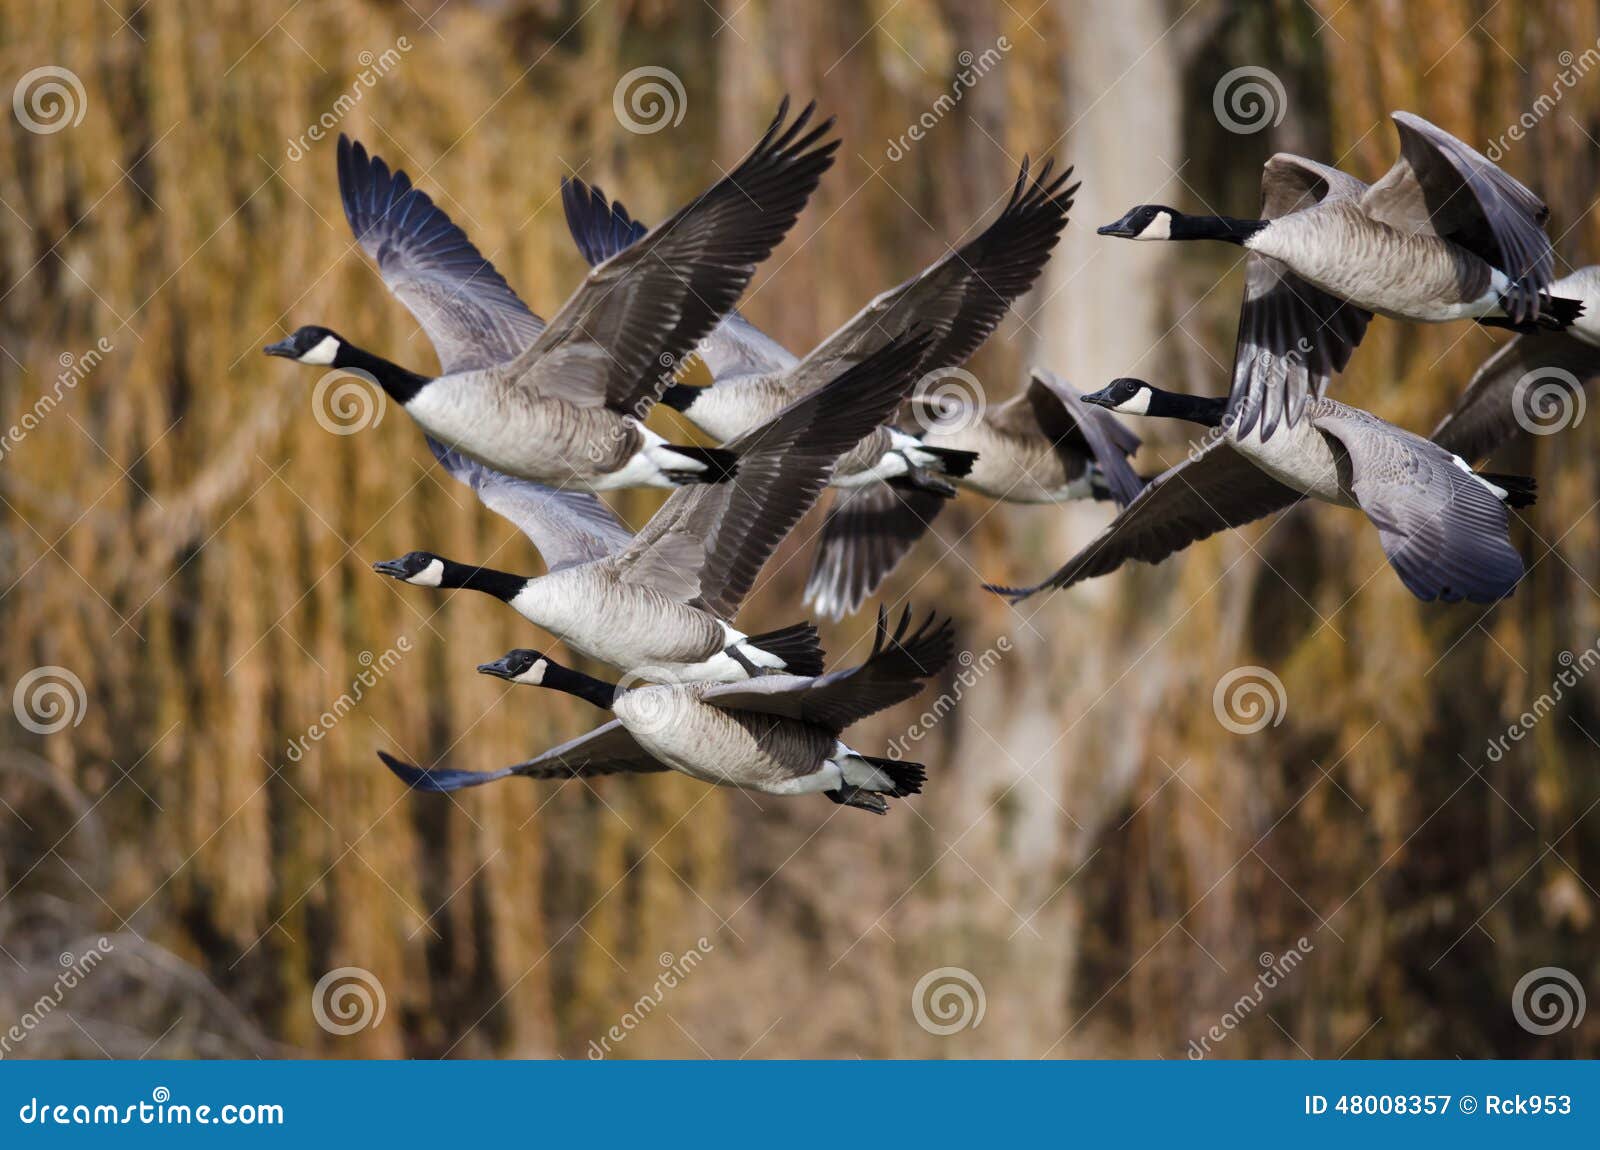 canada geese flying across the autumn woods